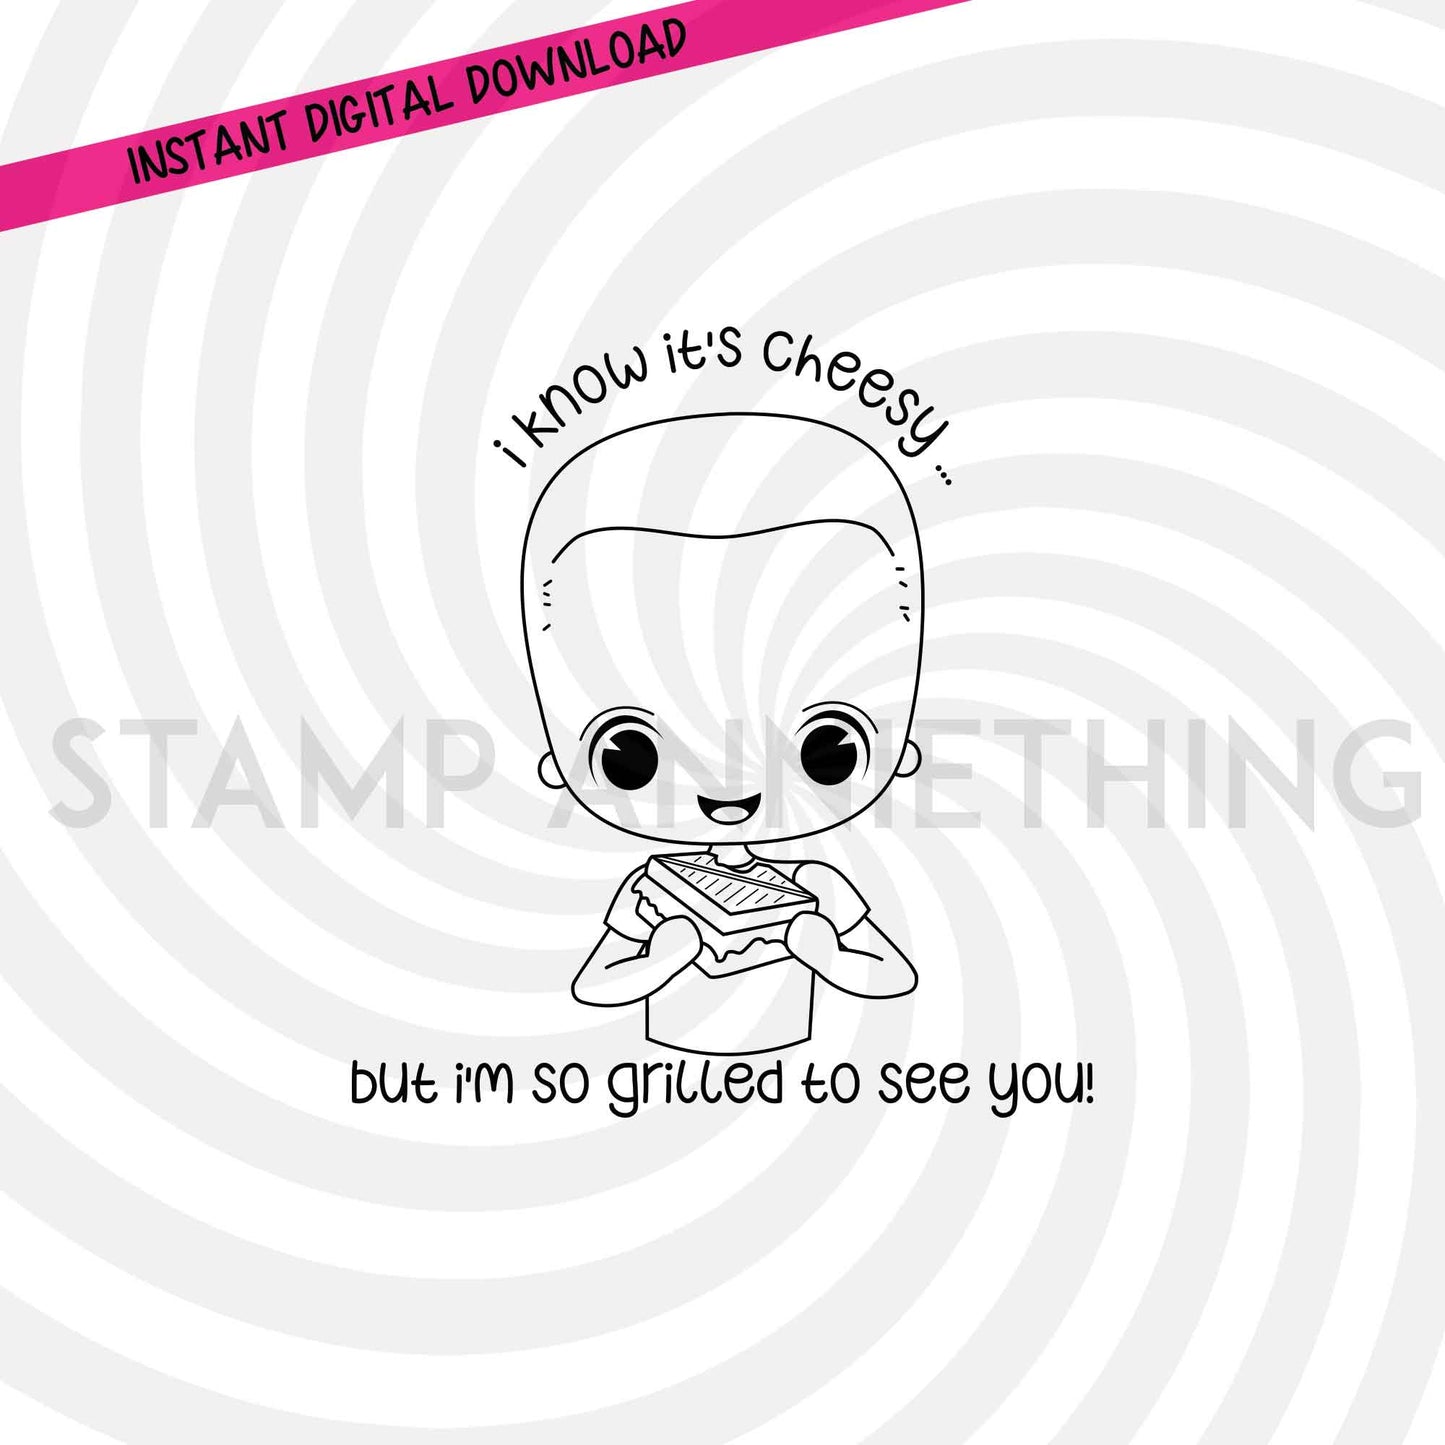 Grilled to See You DIGITAL STAMP